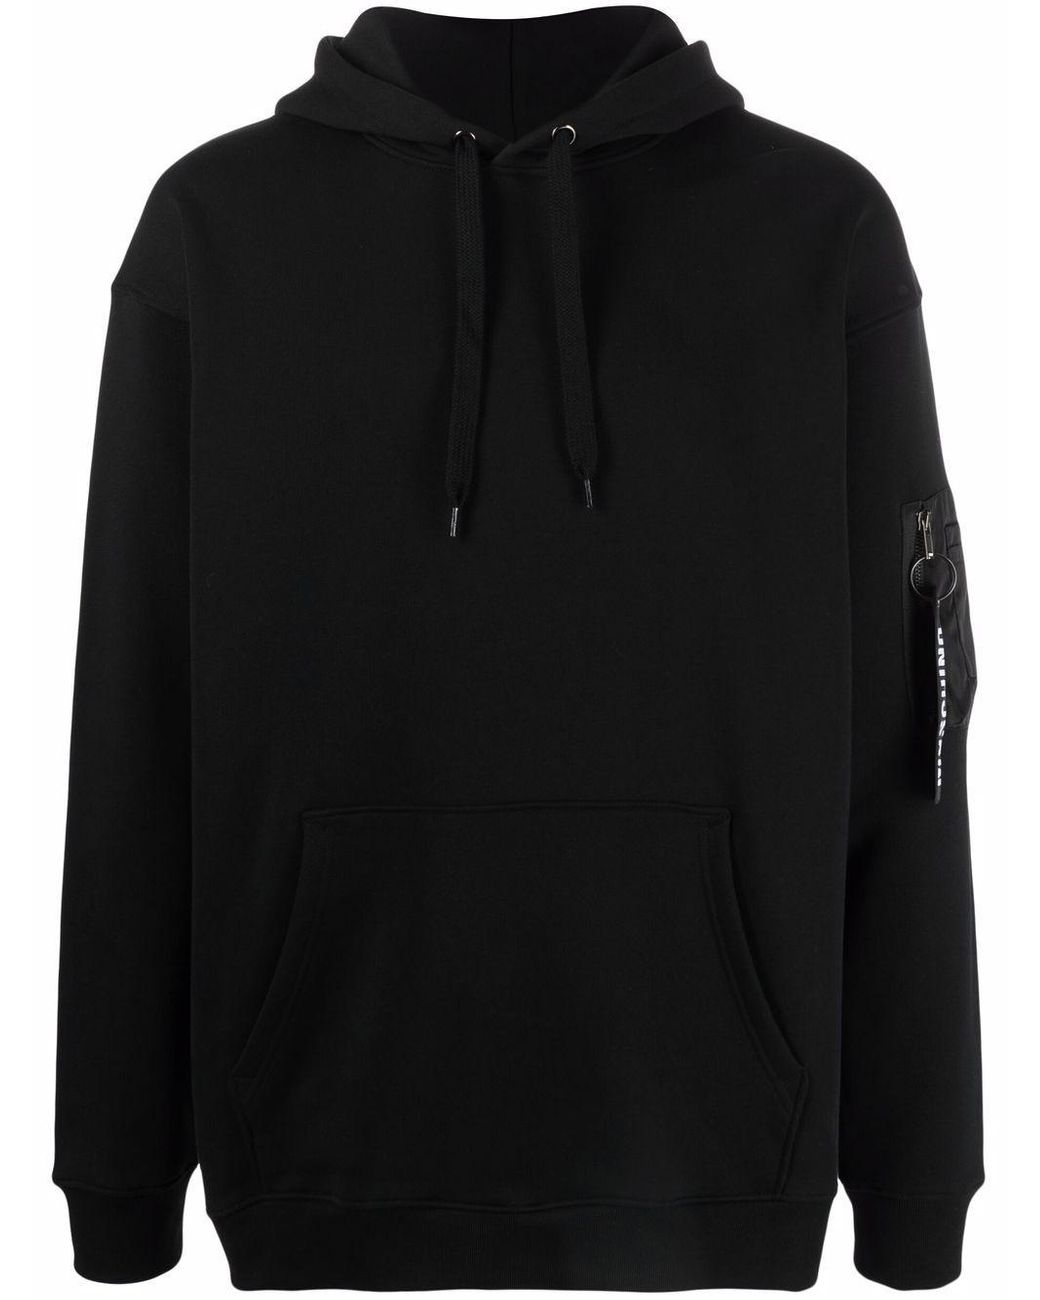 Moschino Cotton Zip Pull Pocket-detail Hoodie in Black for Men - Lyst